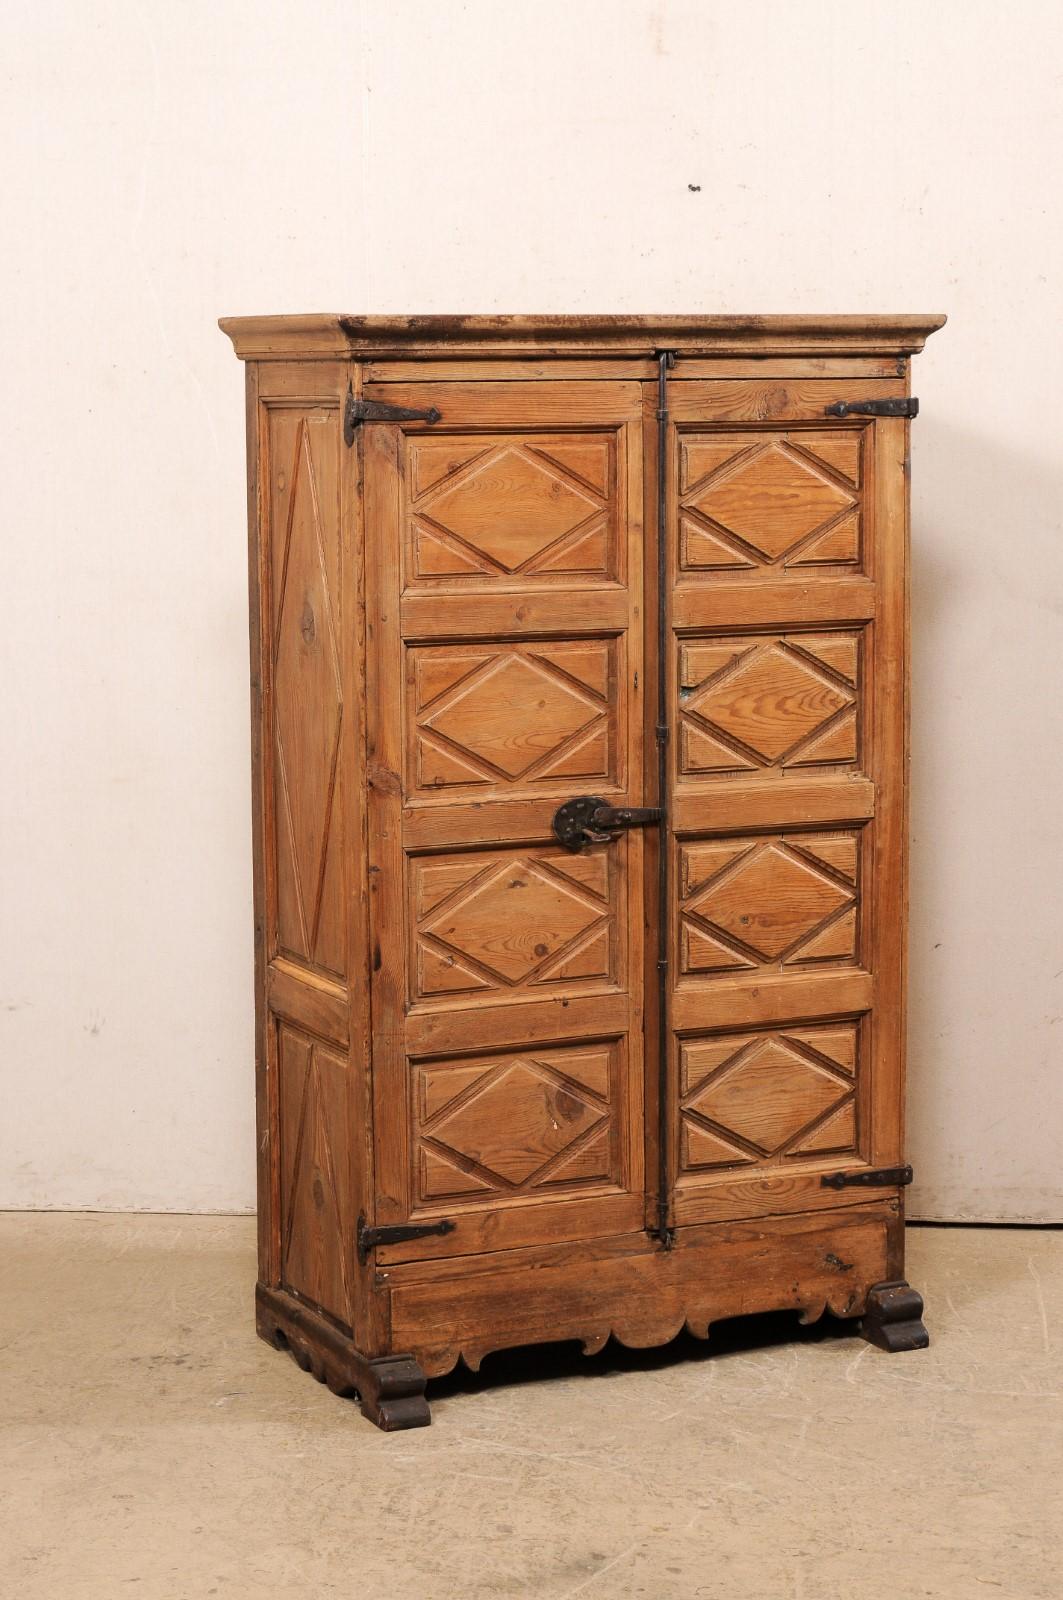 A Spanish carved-wood tall cabinet with two doors from the 19th century. This antique armoire from Spain features a molded cornice at top, with a case that houses a pair of four panel front doors which have been decoratively carved with a diamond